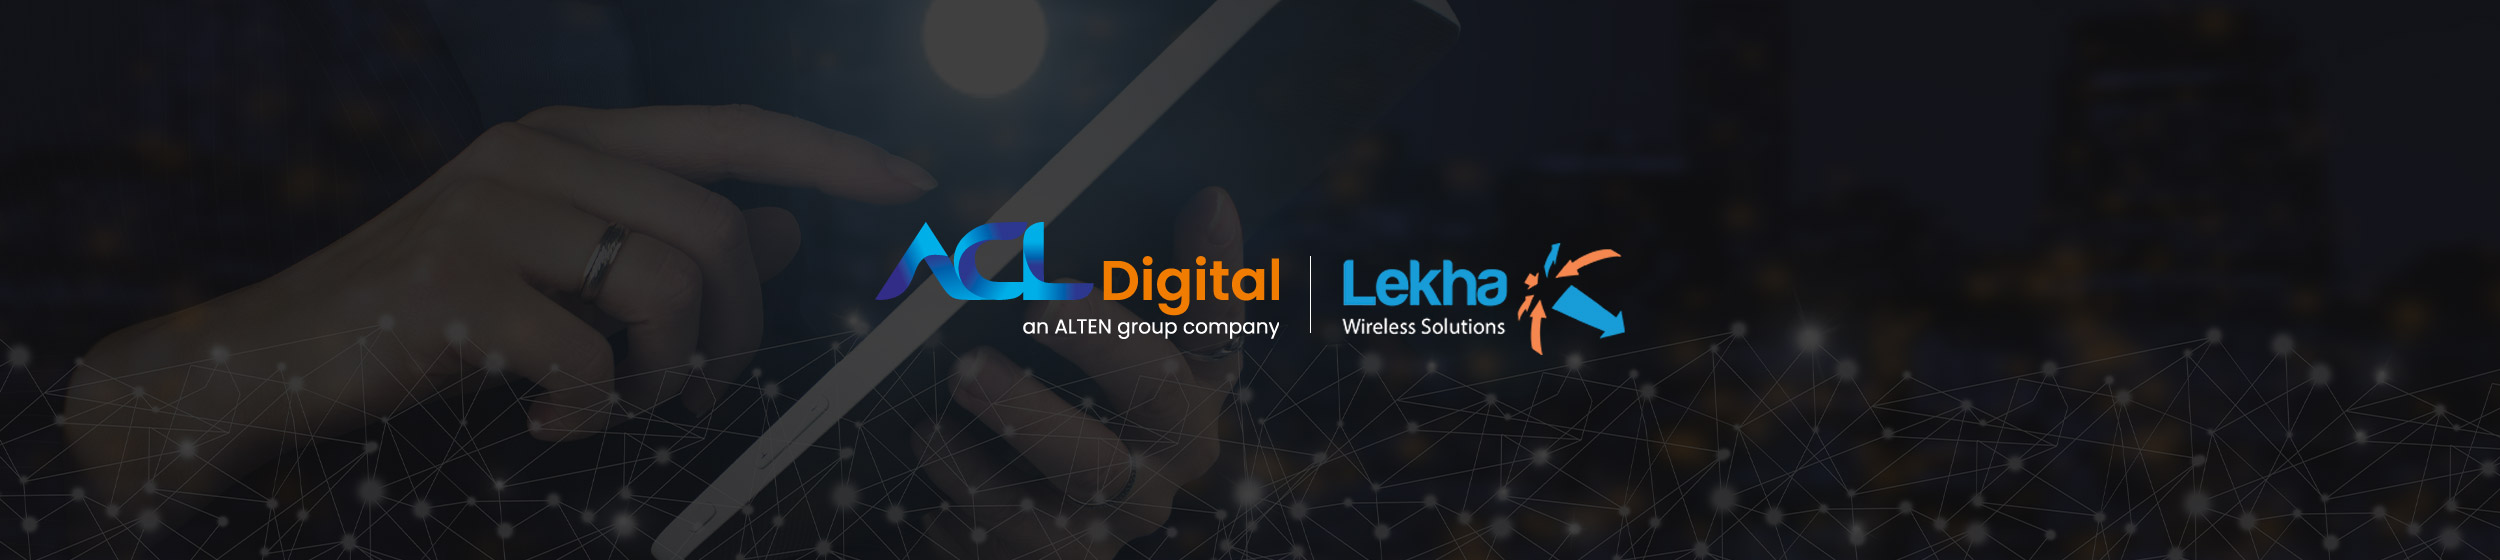 Banner-ACL Digital and Lekha Wireless Join Forces for Advanced 5G Wireless System Integration